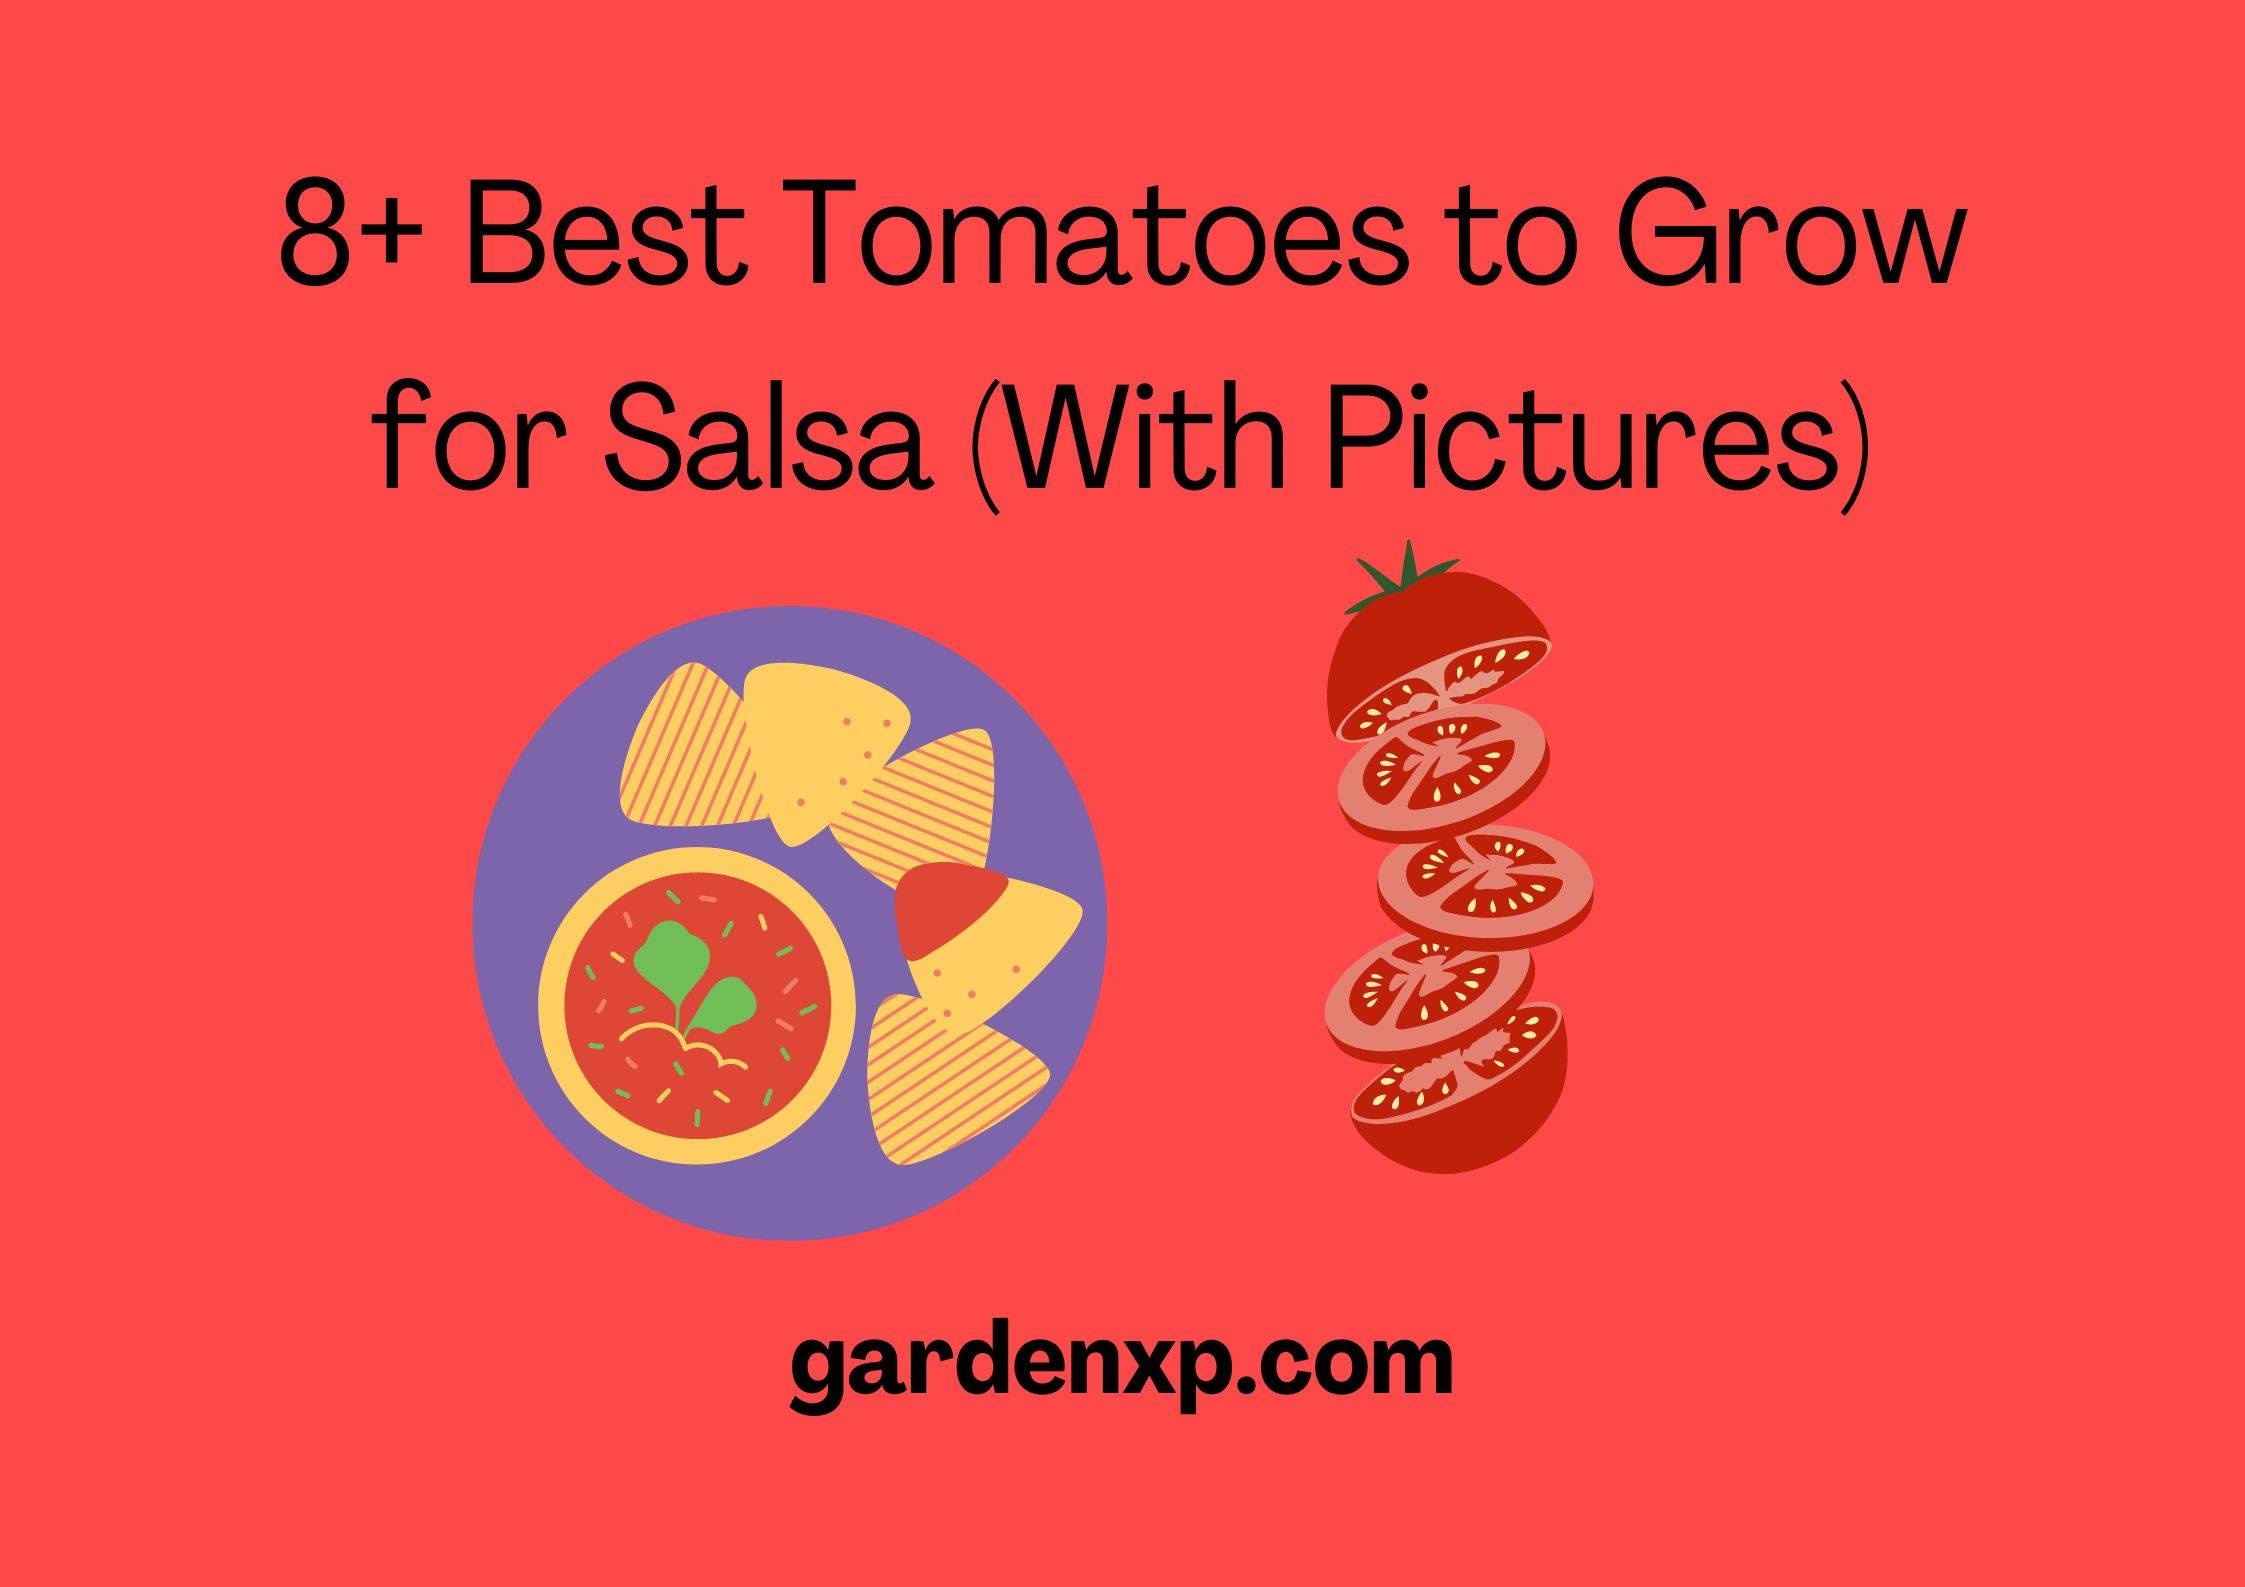 <strong>8+ Best Tomatoes to Grow for Salsa (With Pictures)</strong>